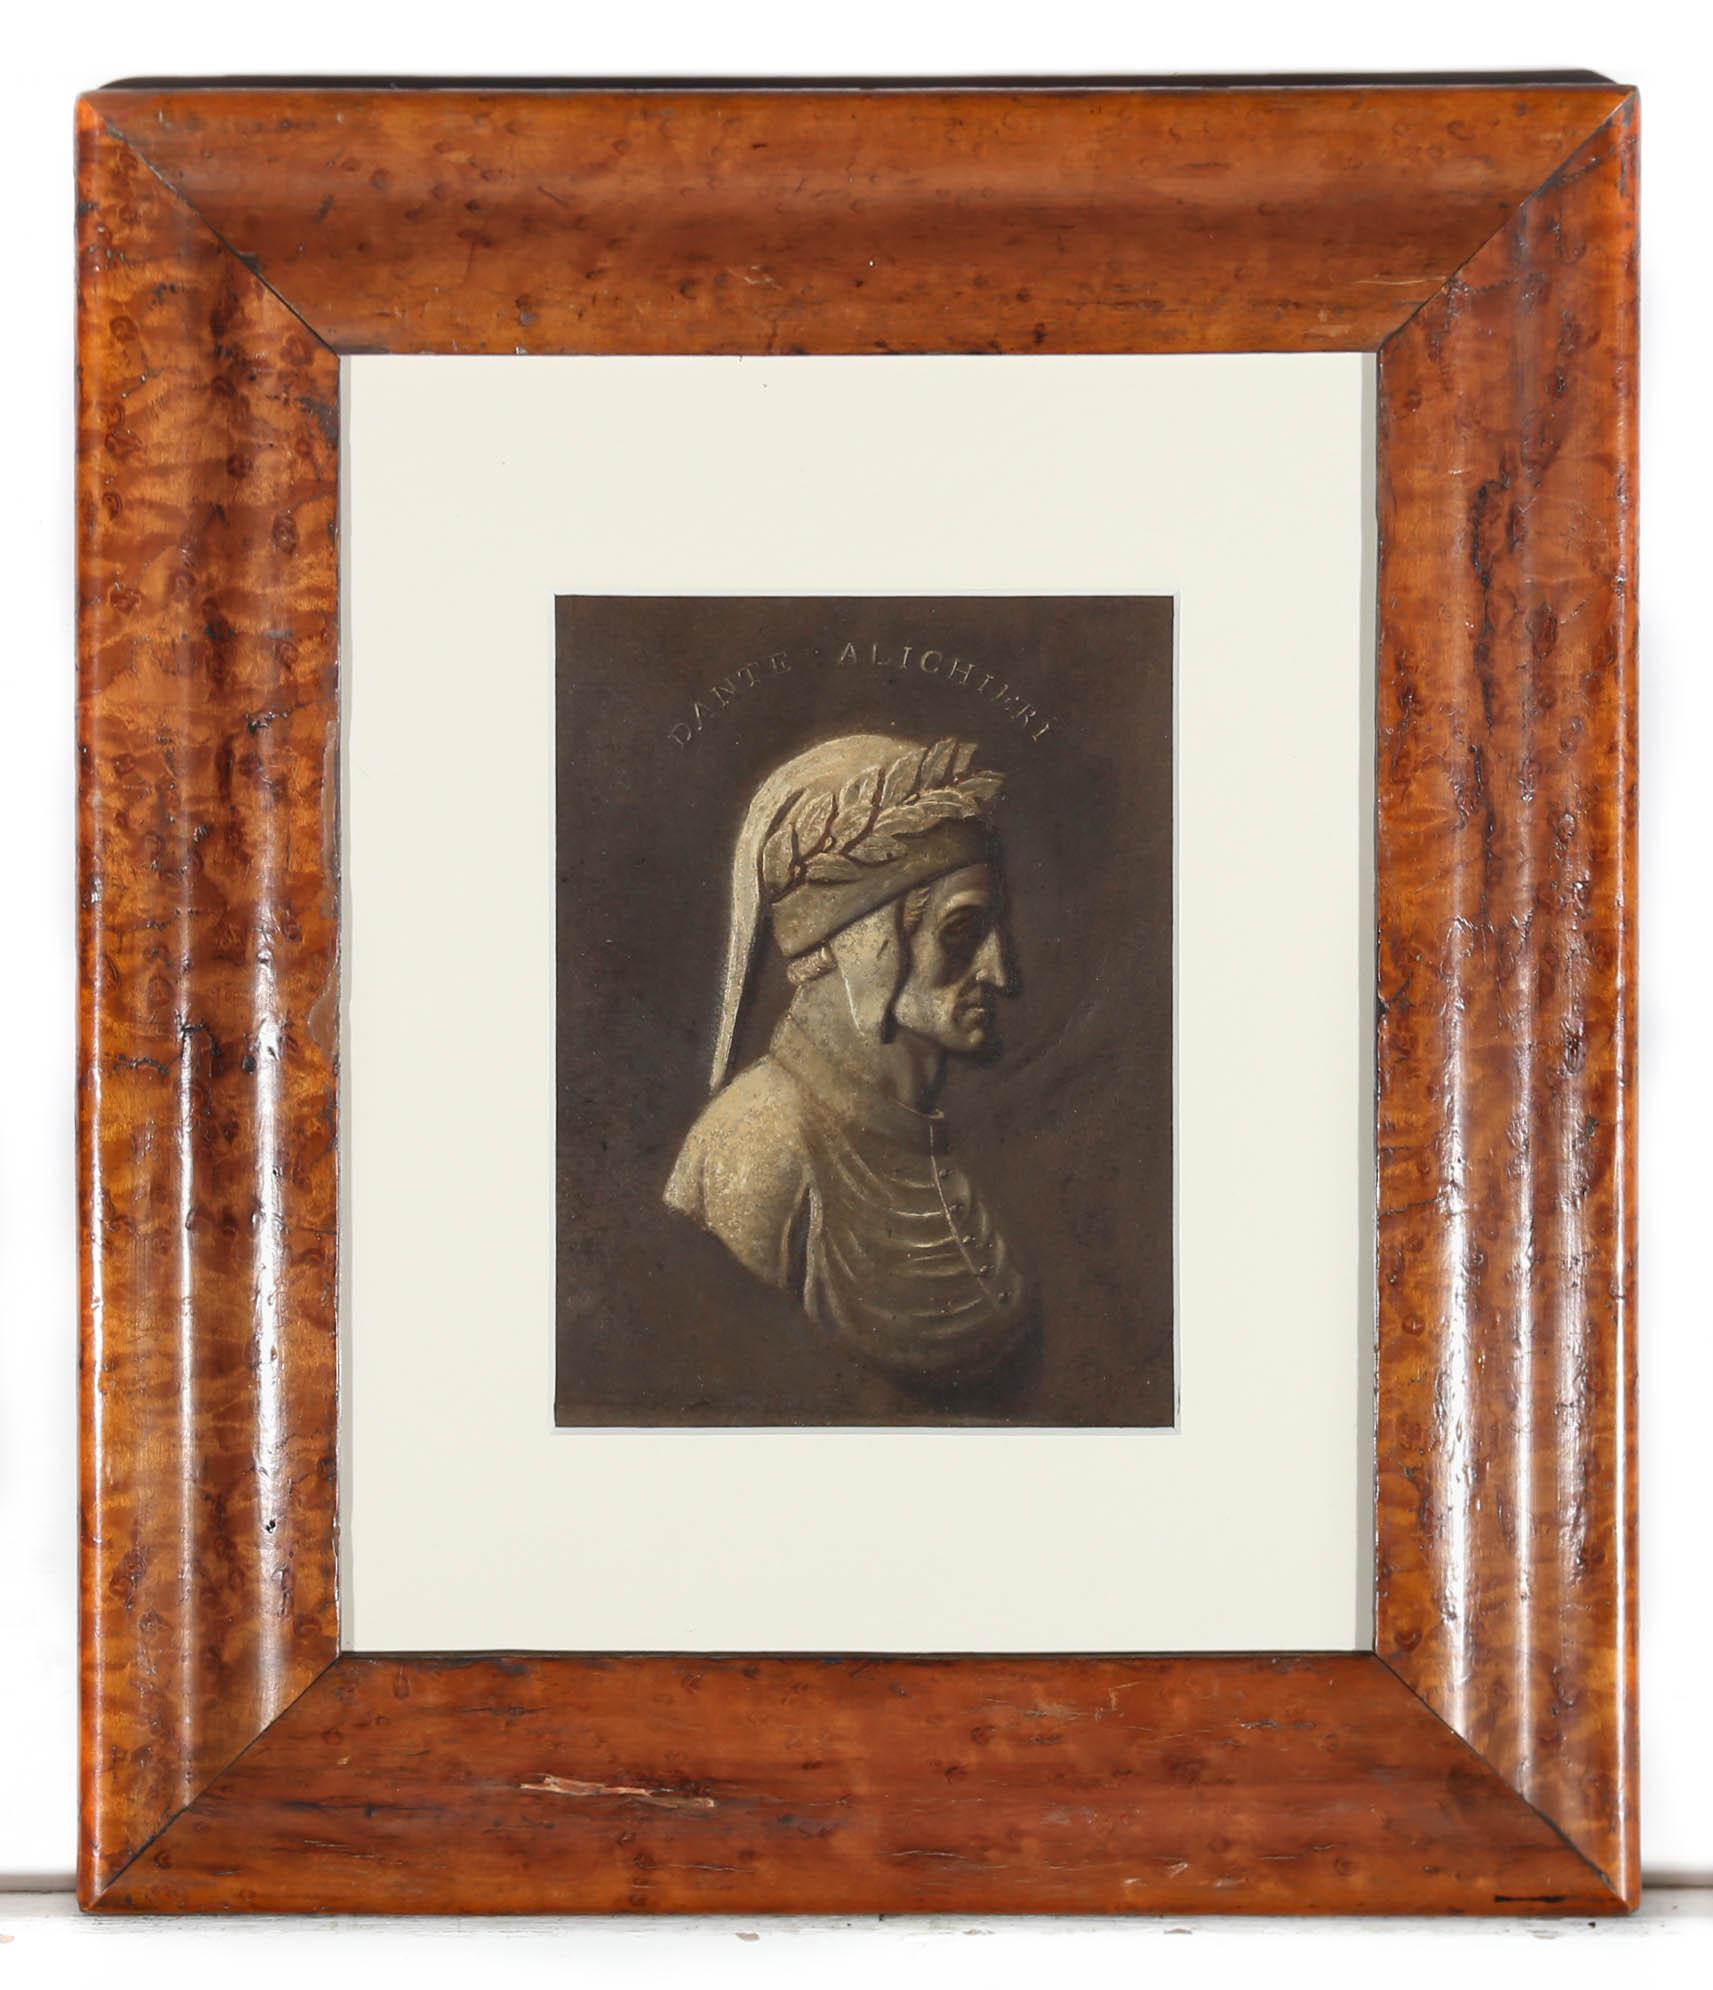 A fine 19th Century relief portrait in oil showing the profile of the renowned Italian poet, writer and philosopher Dante Alighieri. The artist has wonderfully captured Dante's famously stern profile and he wears the traditional laurel leaf crown.